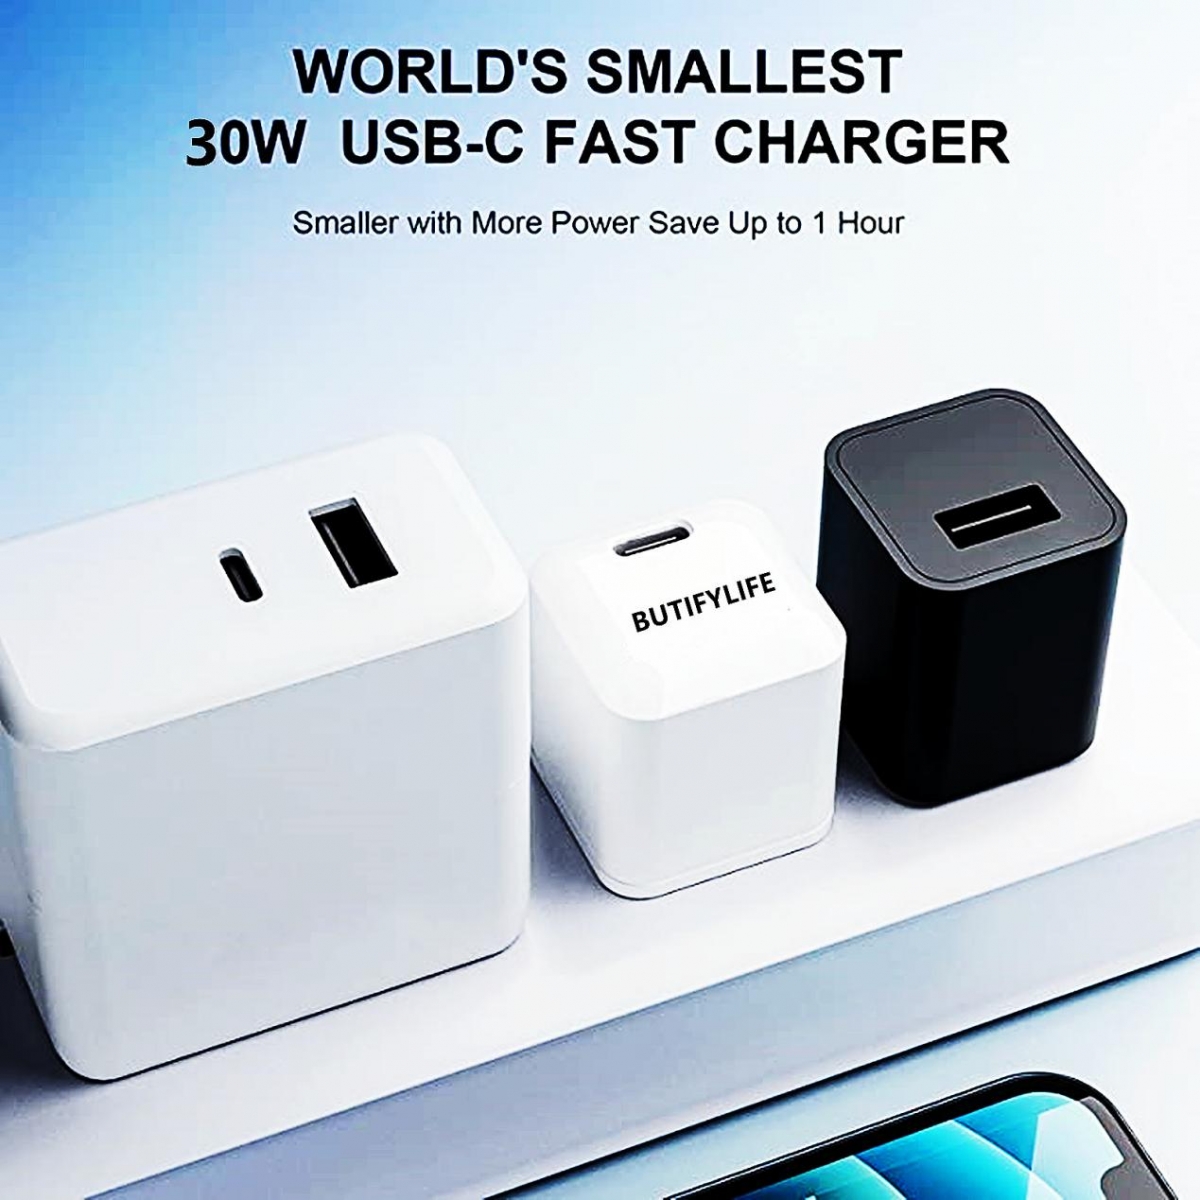 Why 0.5 amp usb wall charger-BUTIFYLIFE-Server Adapter, Apple Pencial